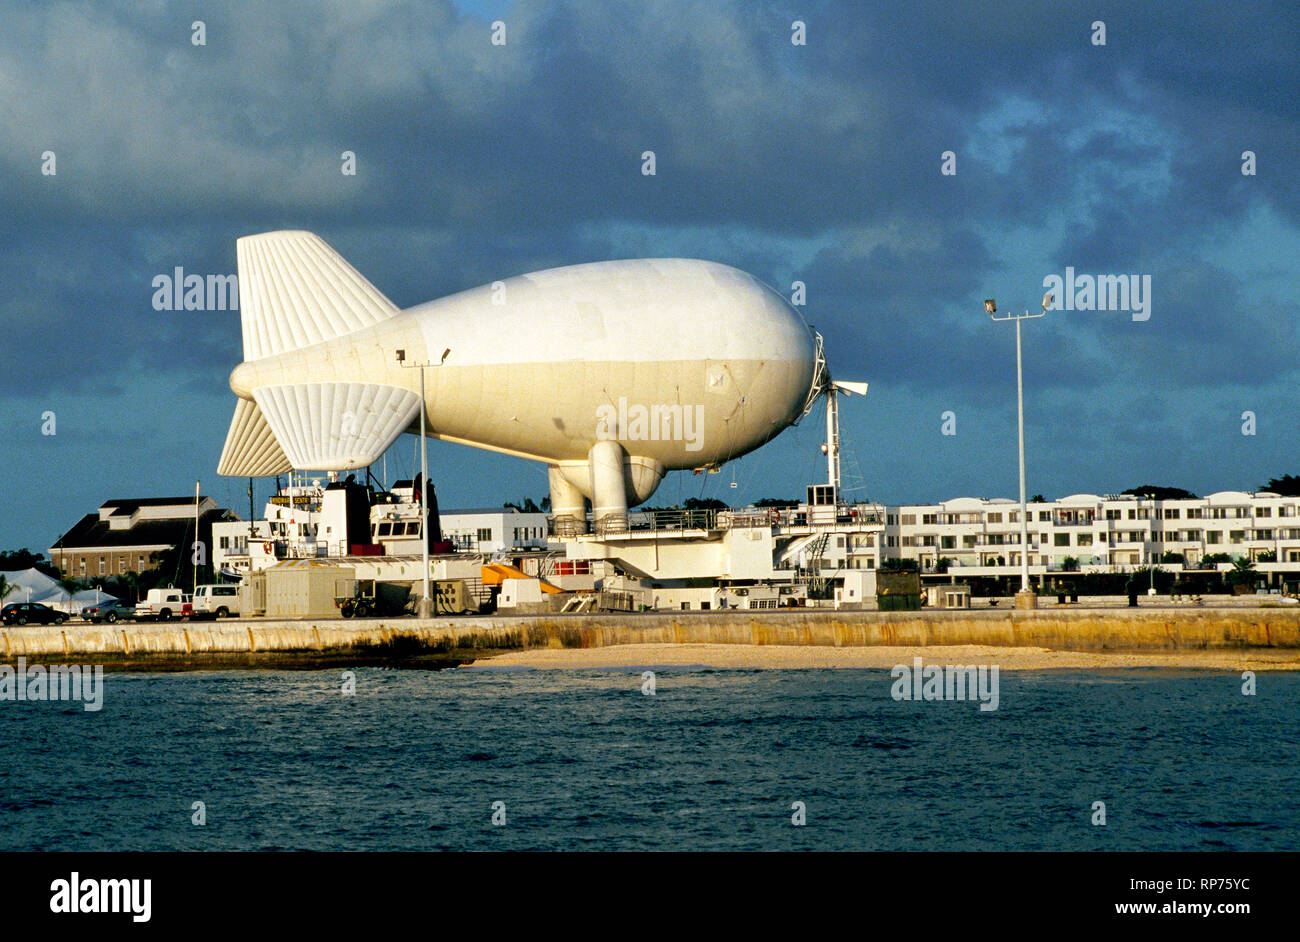 A helium-filled airship that carries aerial radar to detect drug-smuggling and other illegal activities is tethered to a ship at a U.S. Navy dock in Key West, Florida, USA. Officially called an aerostat, the big balloon is locally known as 'Fat Albert' and began operating in the area between the Florida Keys and Cuba in the 1980s. Tethered by a single cable, the unmanned blimp can be floated up to an altitude of 15,000 feet (4672 meters) and give radar coverage over 200 nautical miles (370 kilometers). It is now one of eight aerostats providing surveillance along America's southern border. Stock Photo